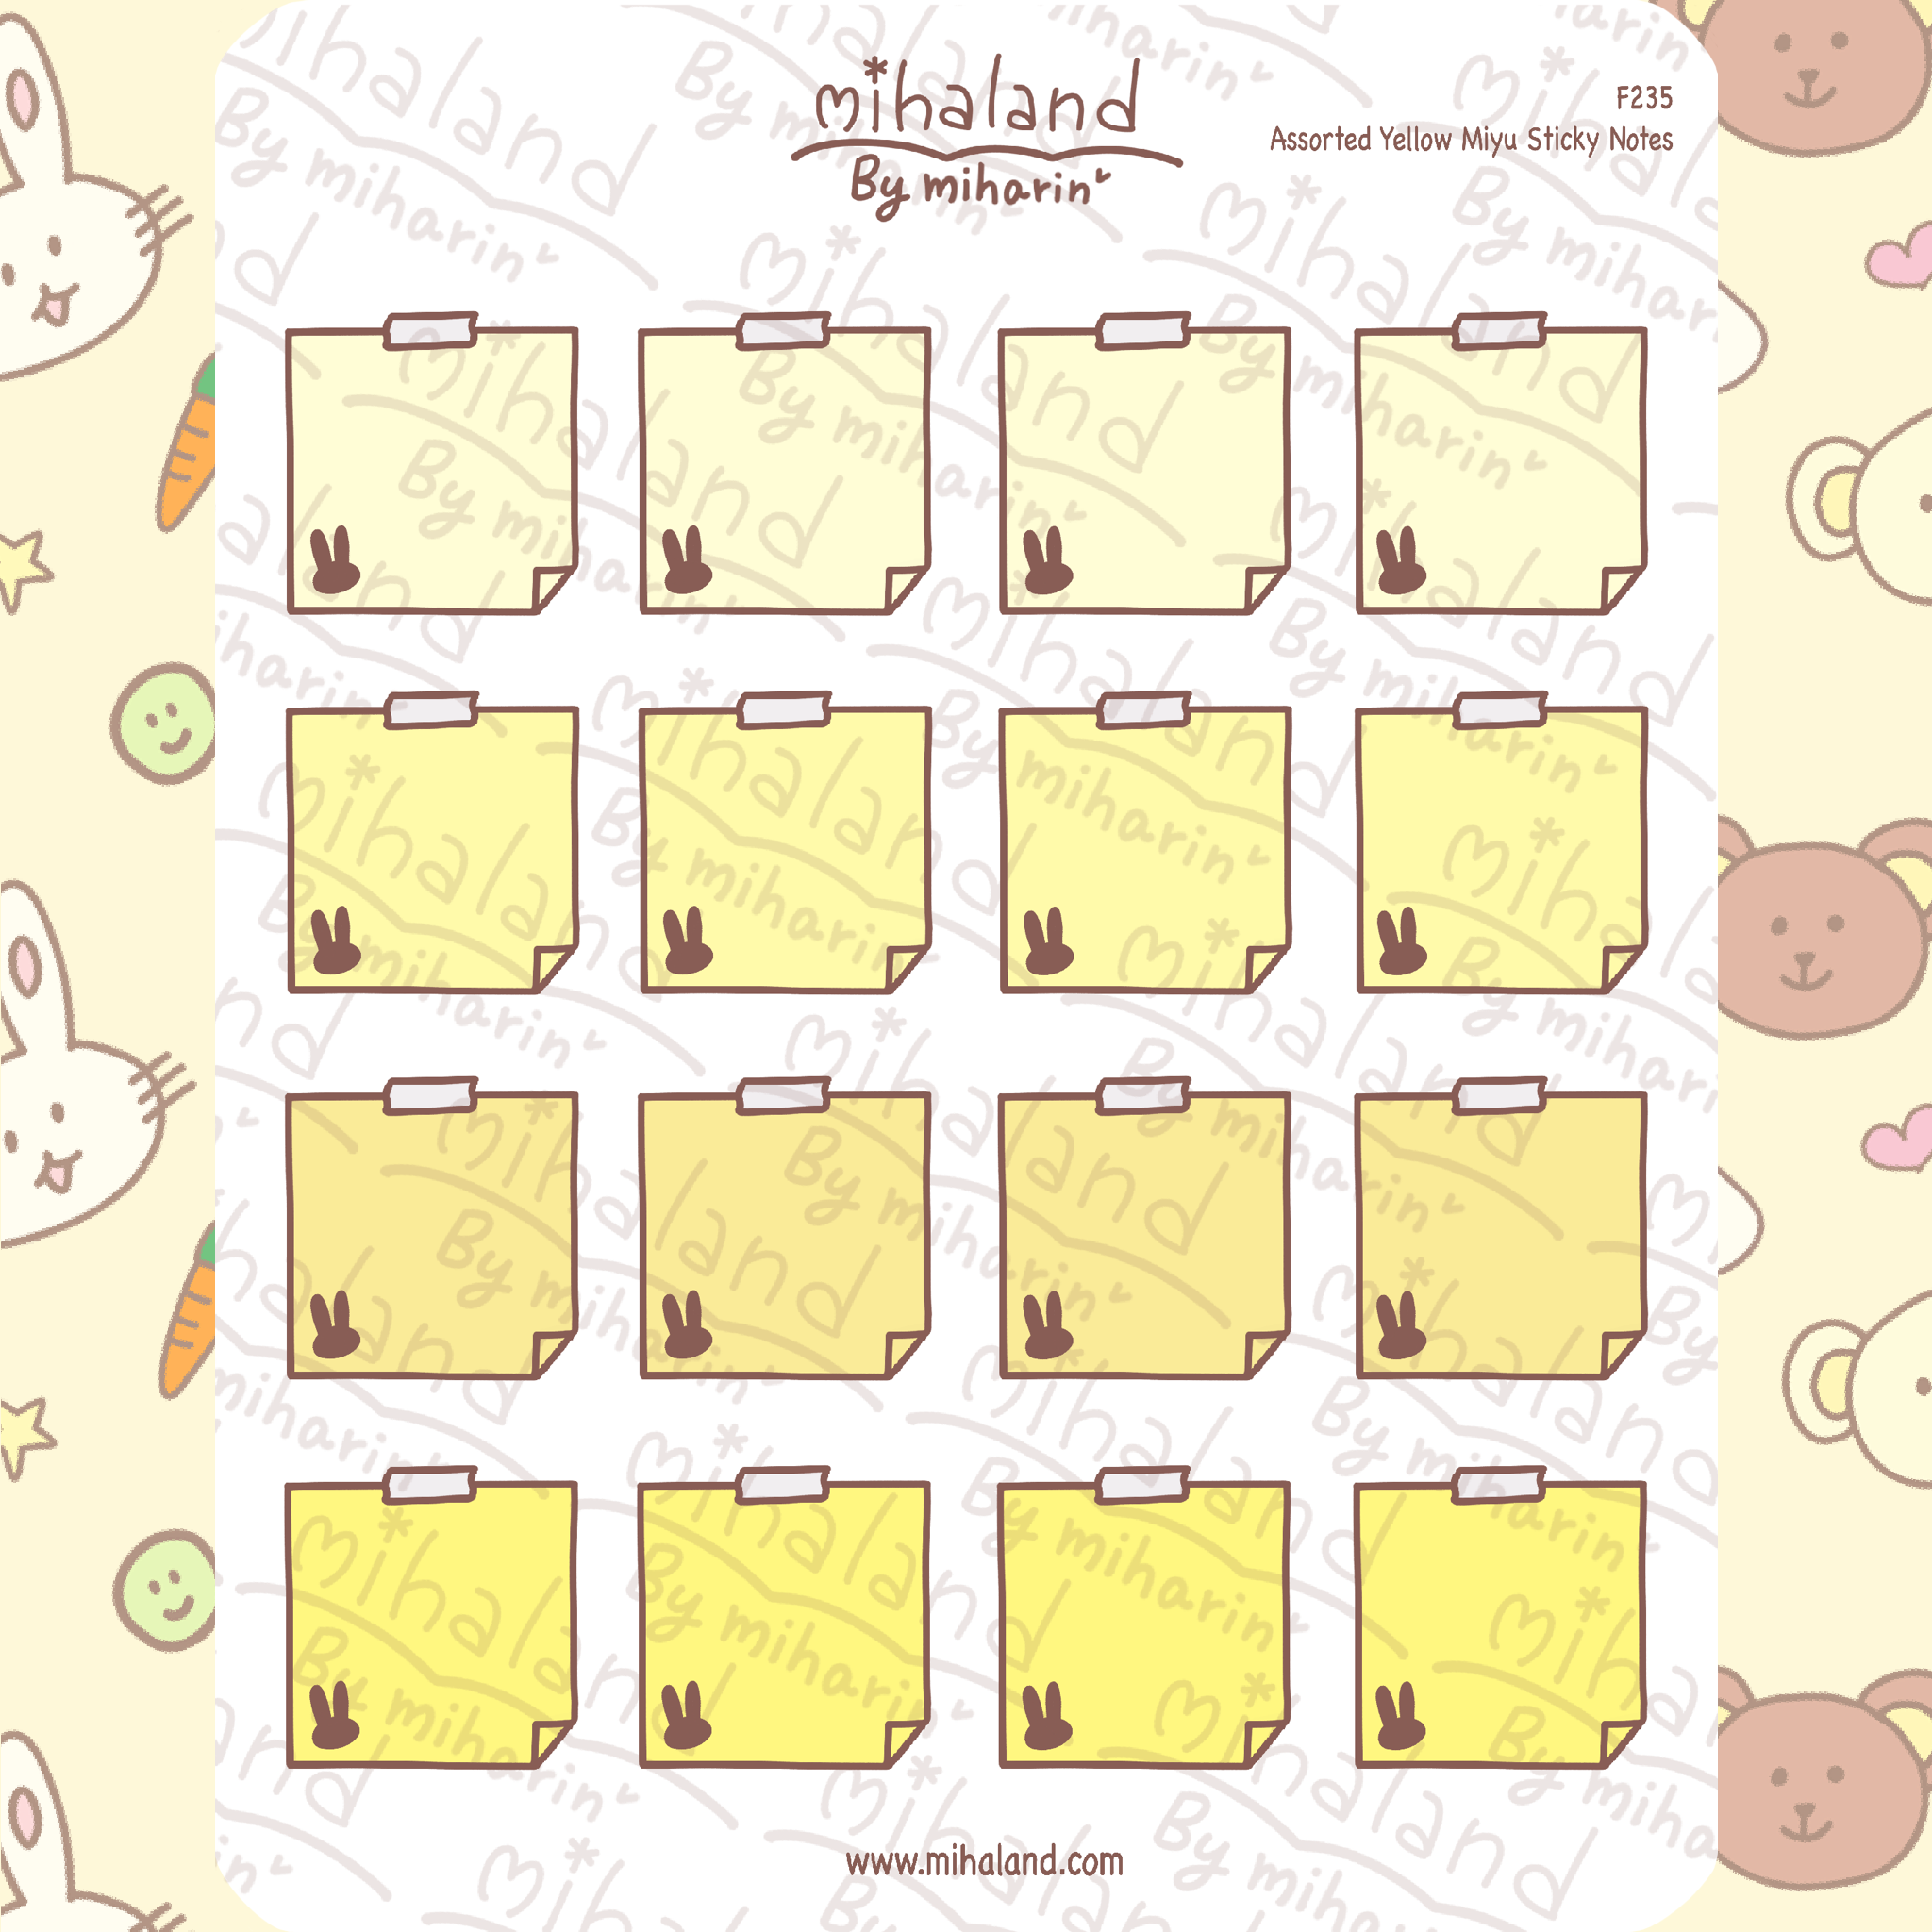 Assorted Yellow Miyu Sticky Notes Planner Stickers (F235)